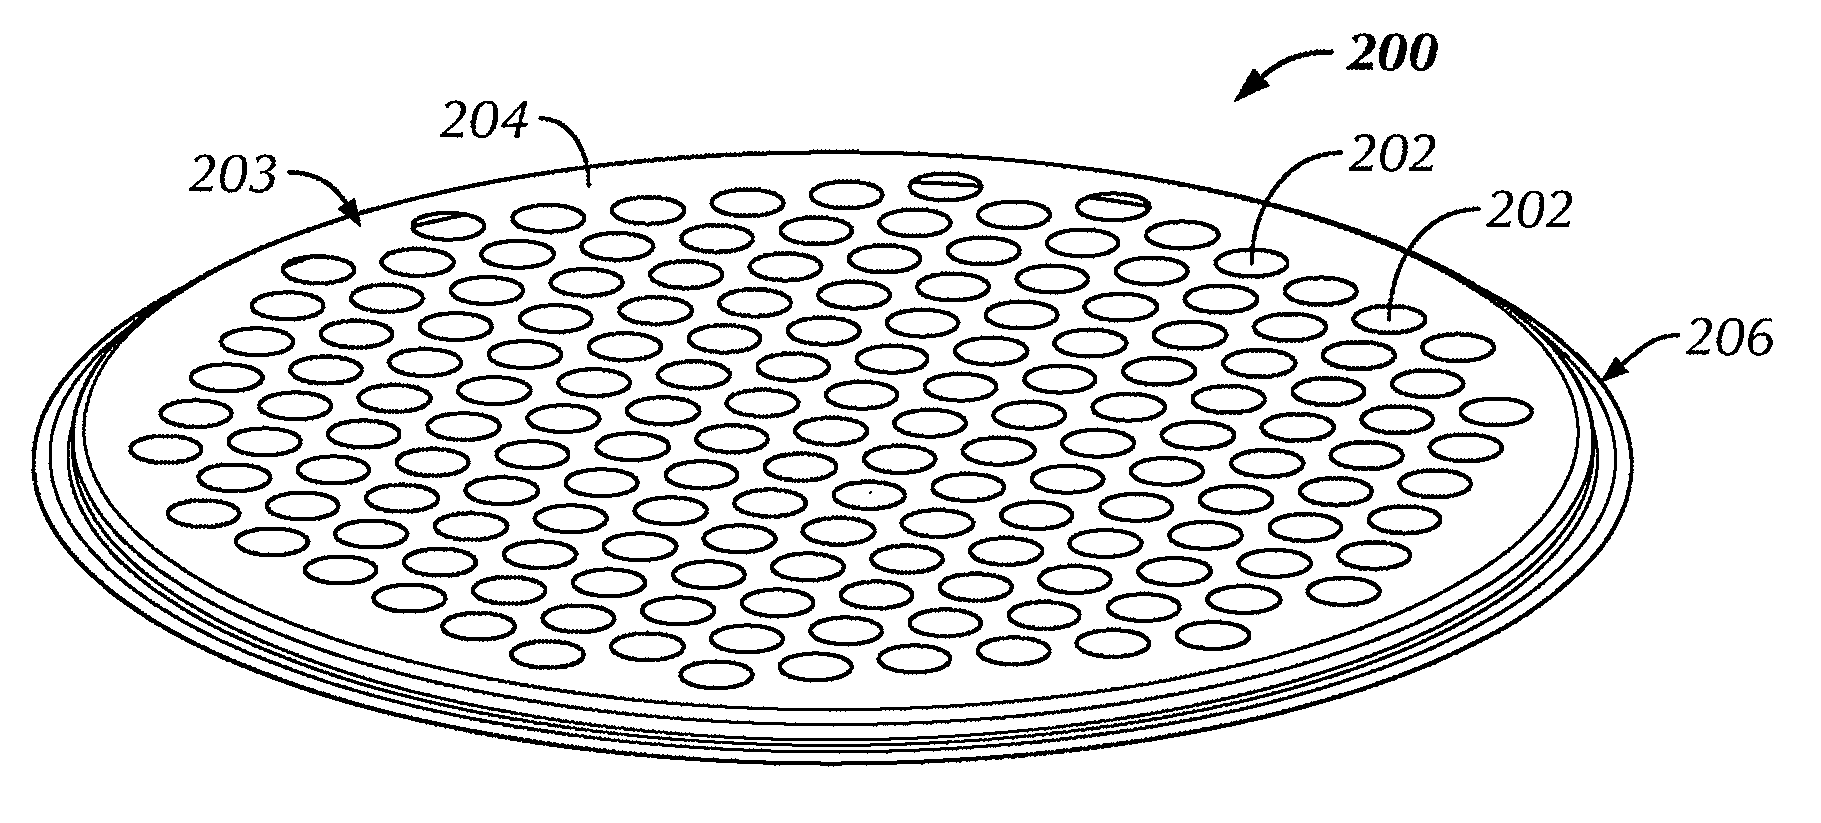 Flanged perforated metal plate for separation of pellets and particles